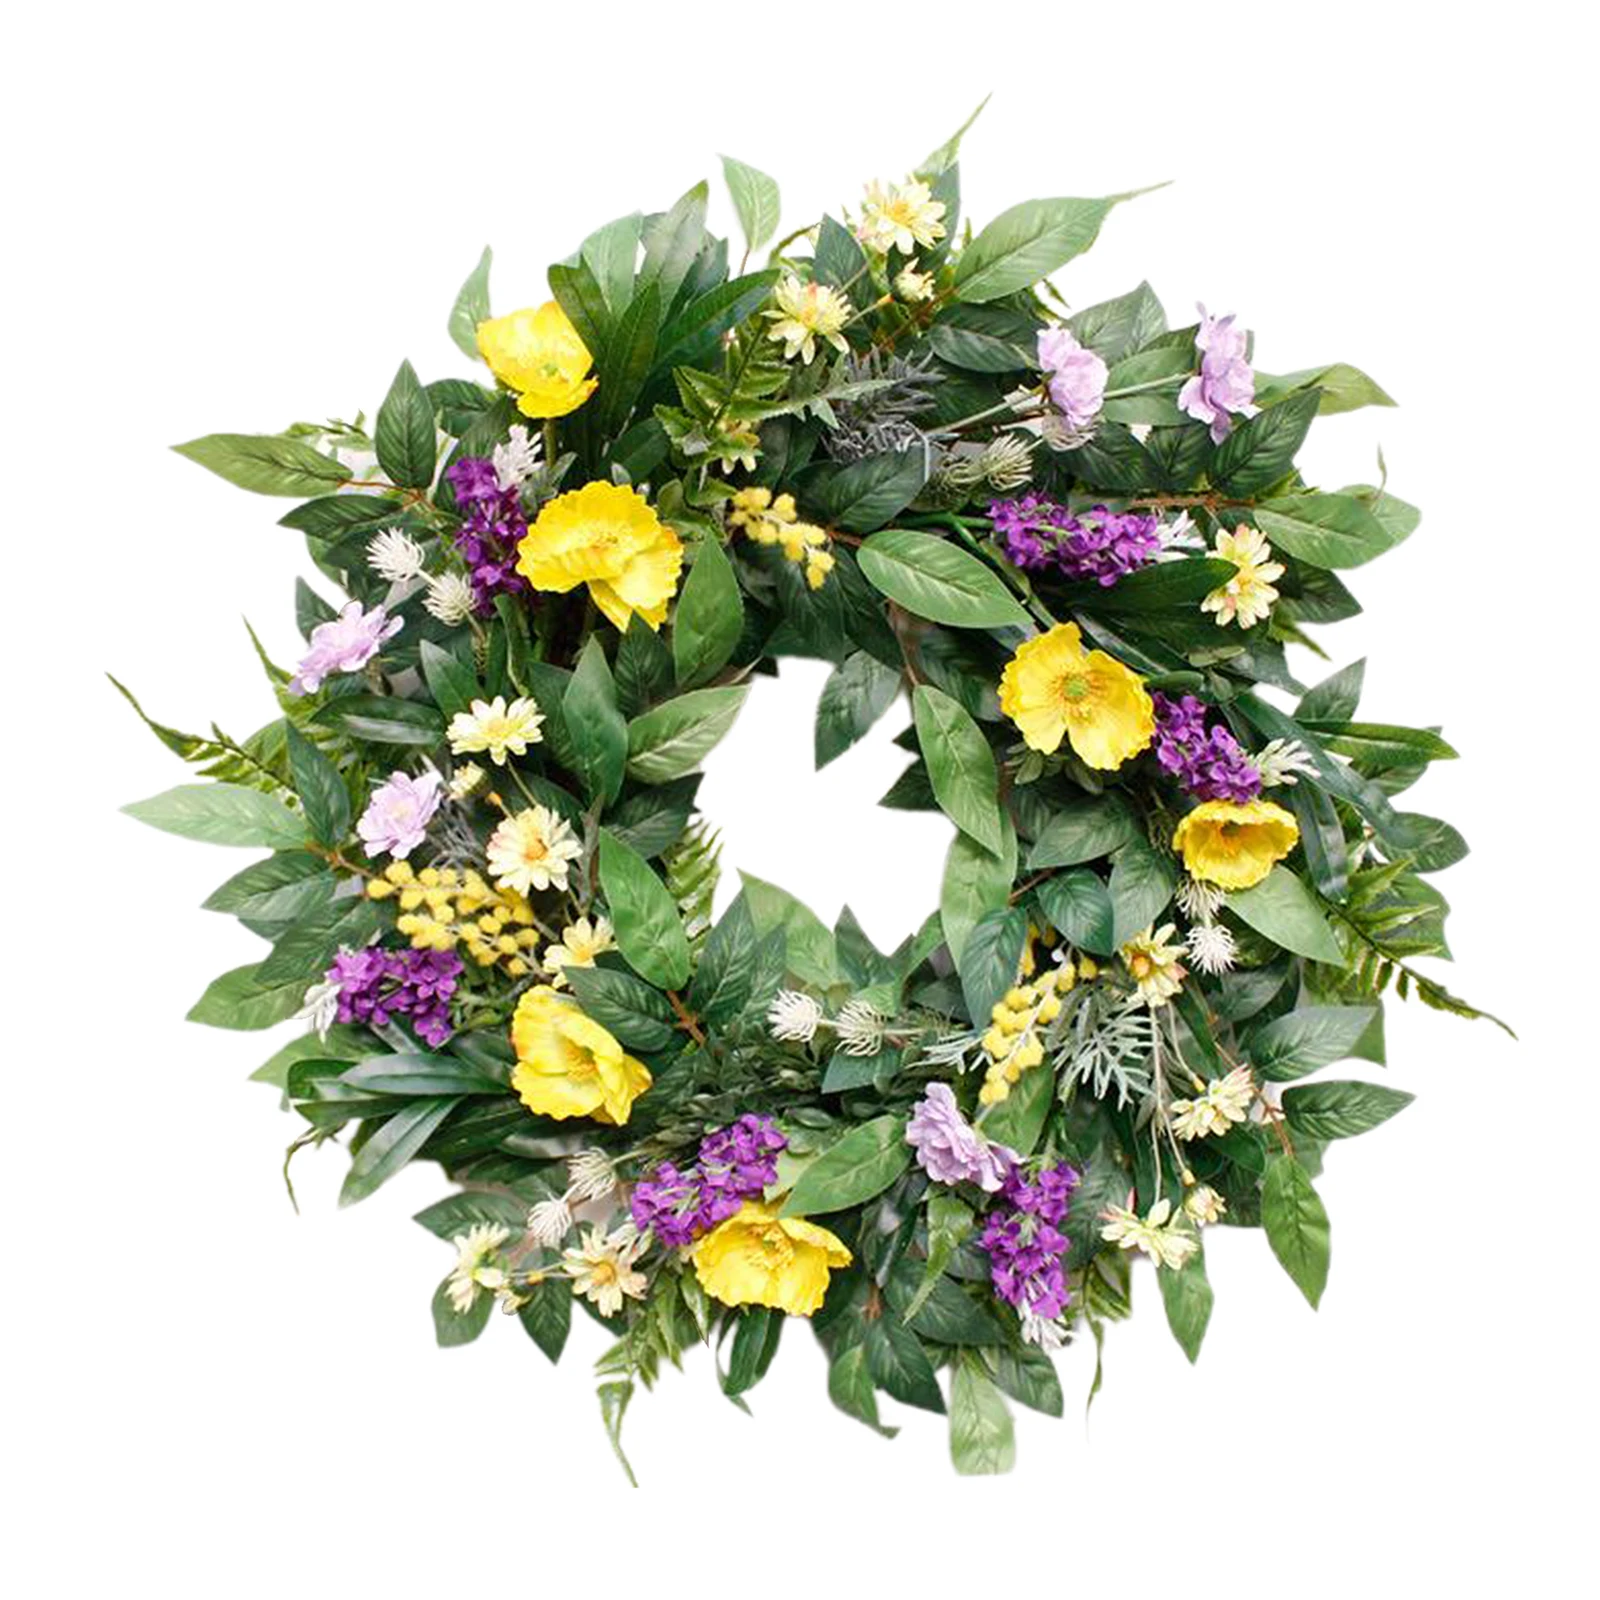 Floral Wreath Summer Daisy Front Door Garland Photographing Props Ornament